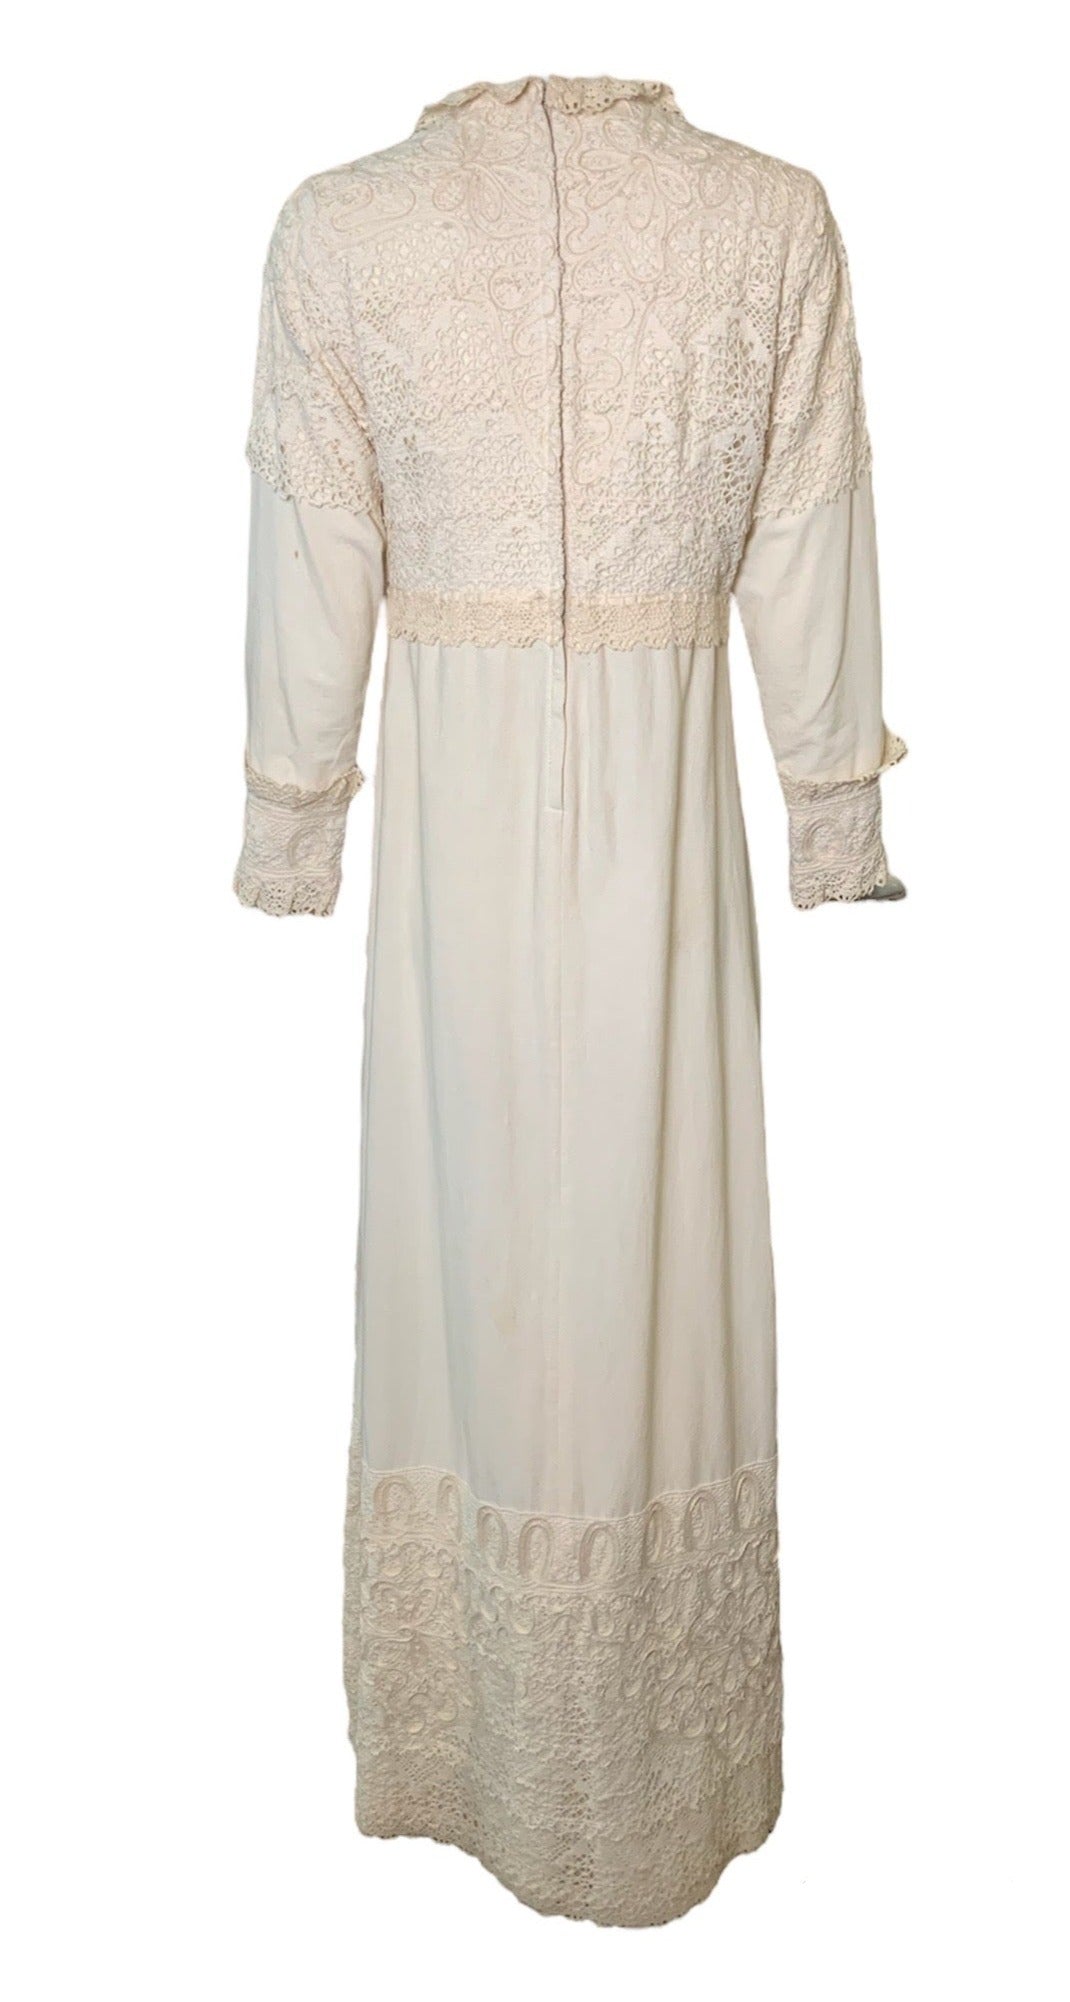  Fred Leighton 60s ivory cotton peasant style maxi dress BACK 3 of 5